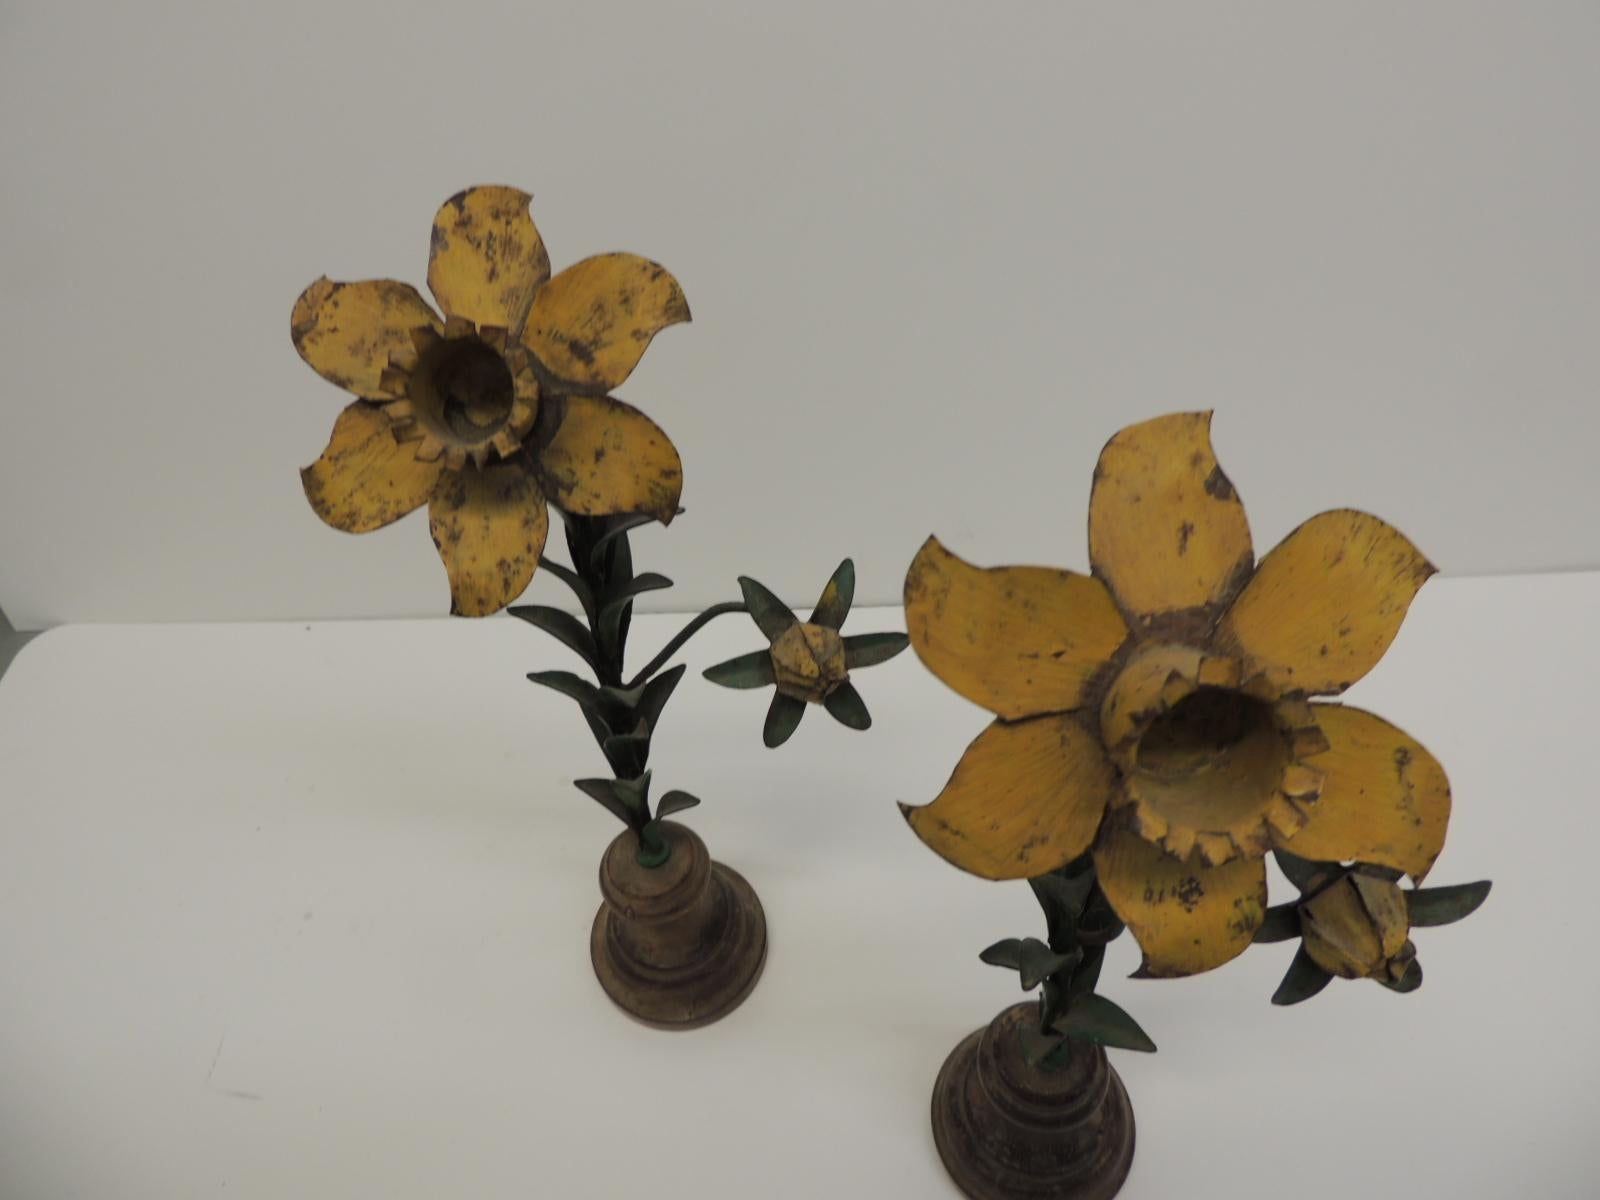 Pair of vintage tole flowers on wood round stands.
Vintage tole flowers mounted on round stands painted yellow with green stems mounted on wood round stands. Made in Italy (stamped in the bottom) for Howard Klivan Interiors.
What is Italian tole?